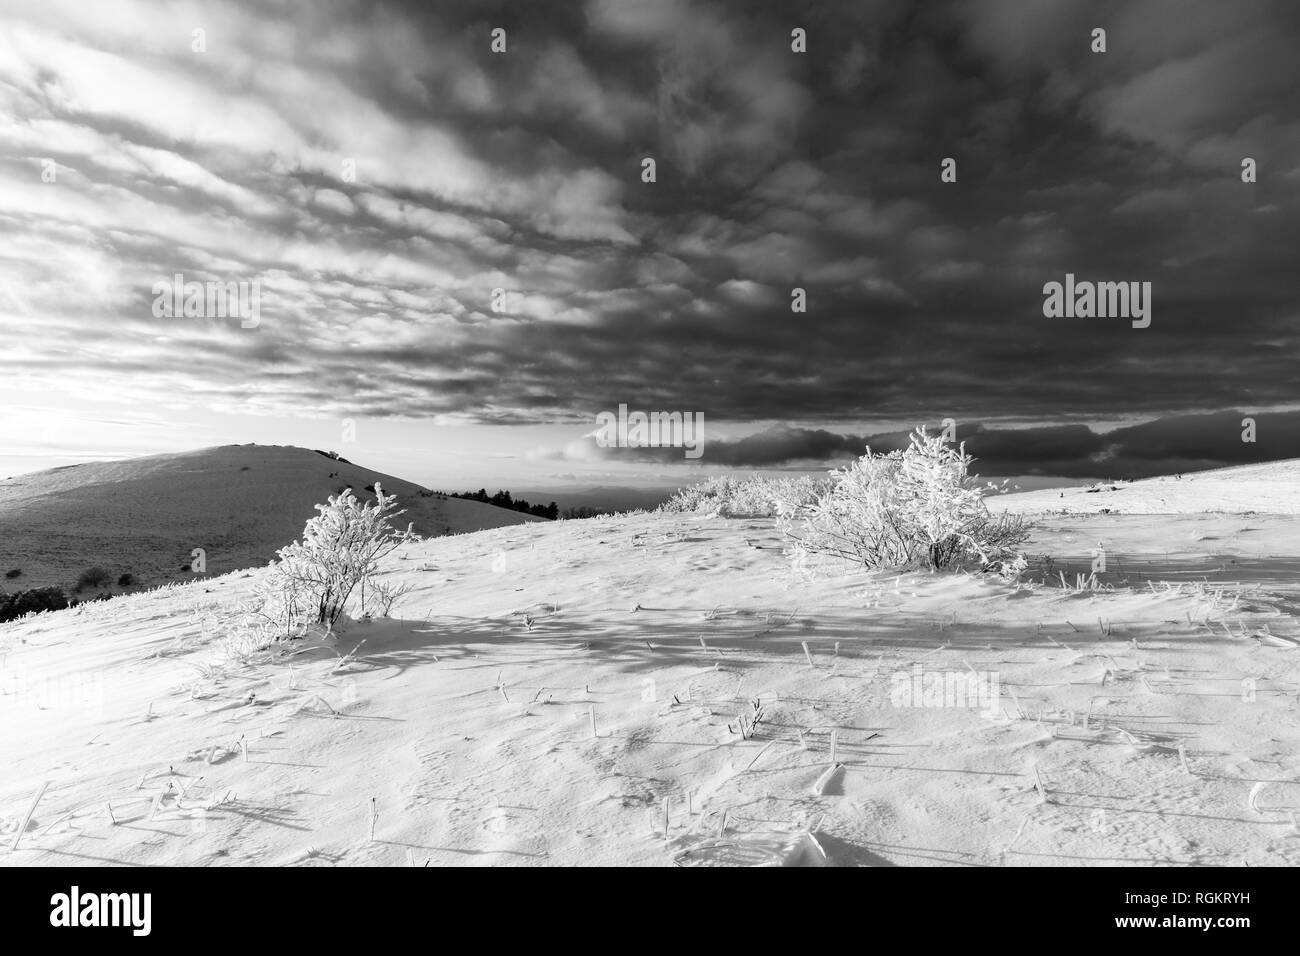 Subasio mountain (Umbria, Italy) in winter, covered by snow, with plants Stock Photo